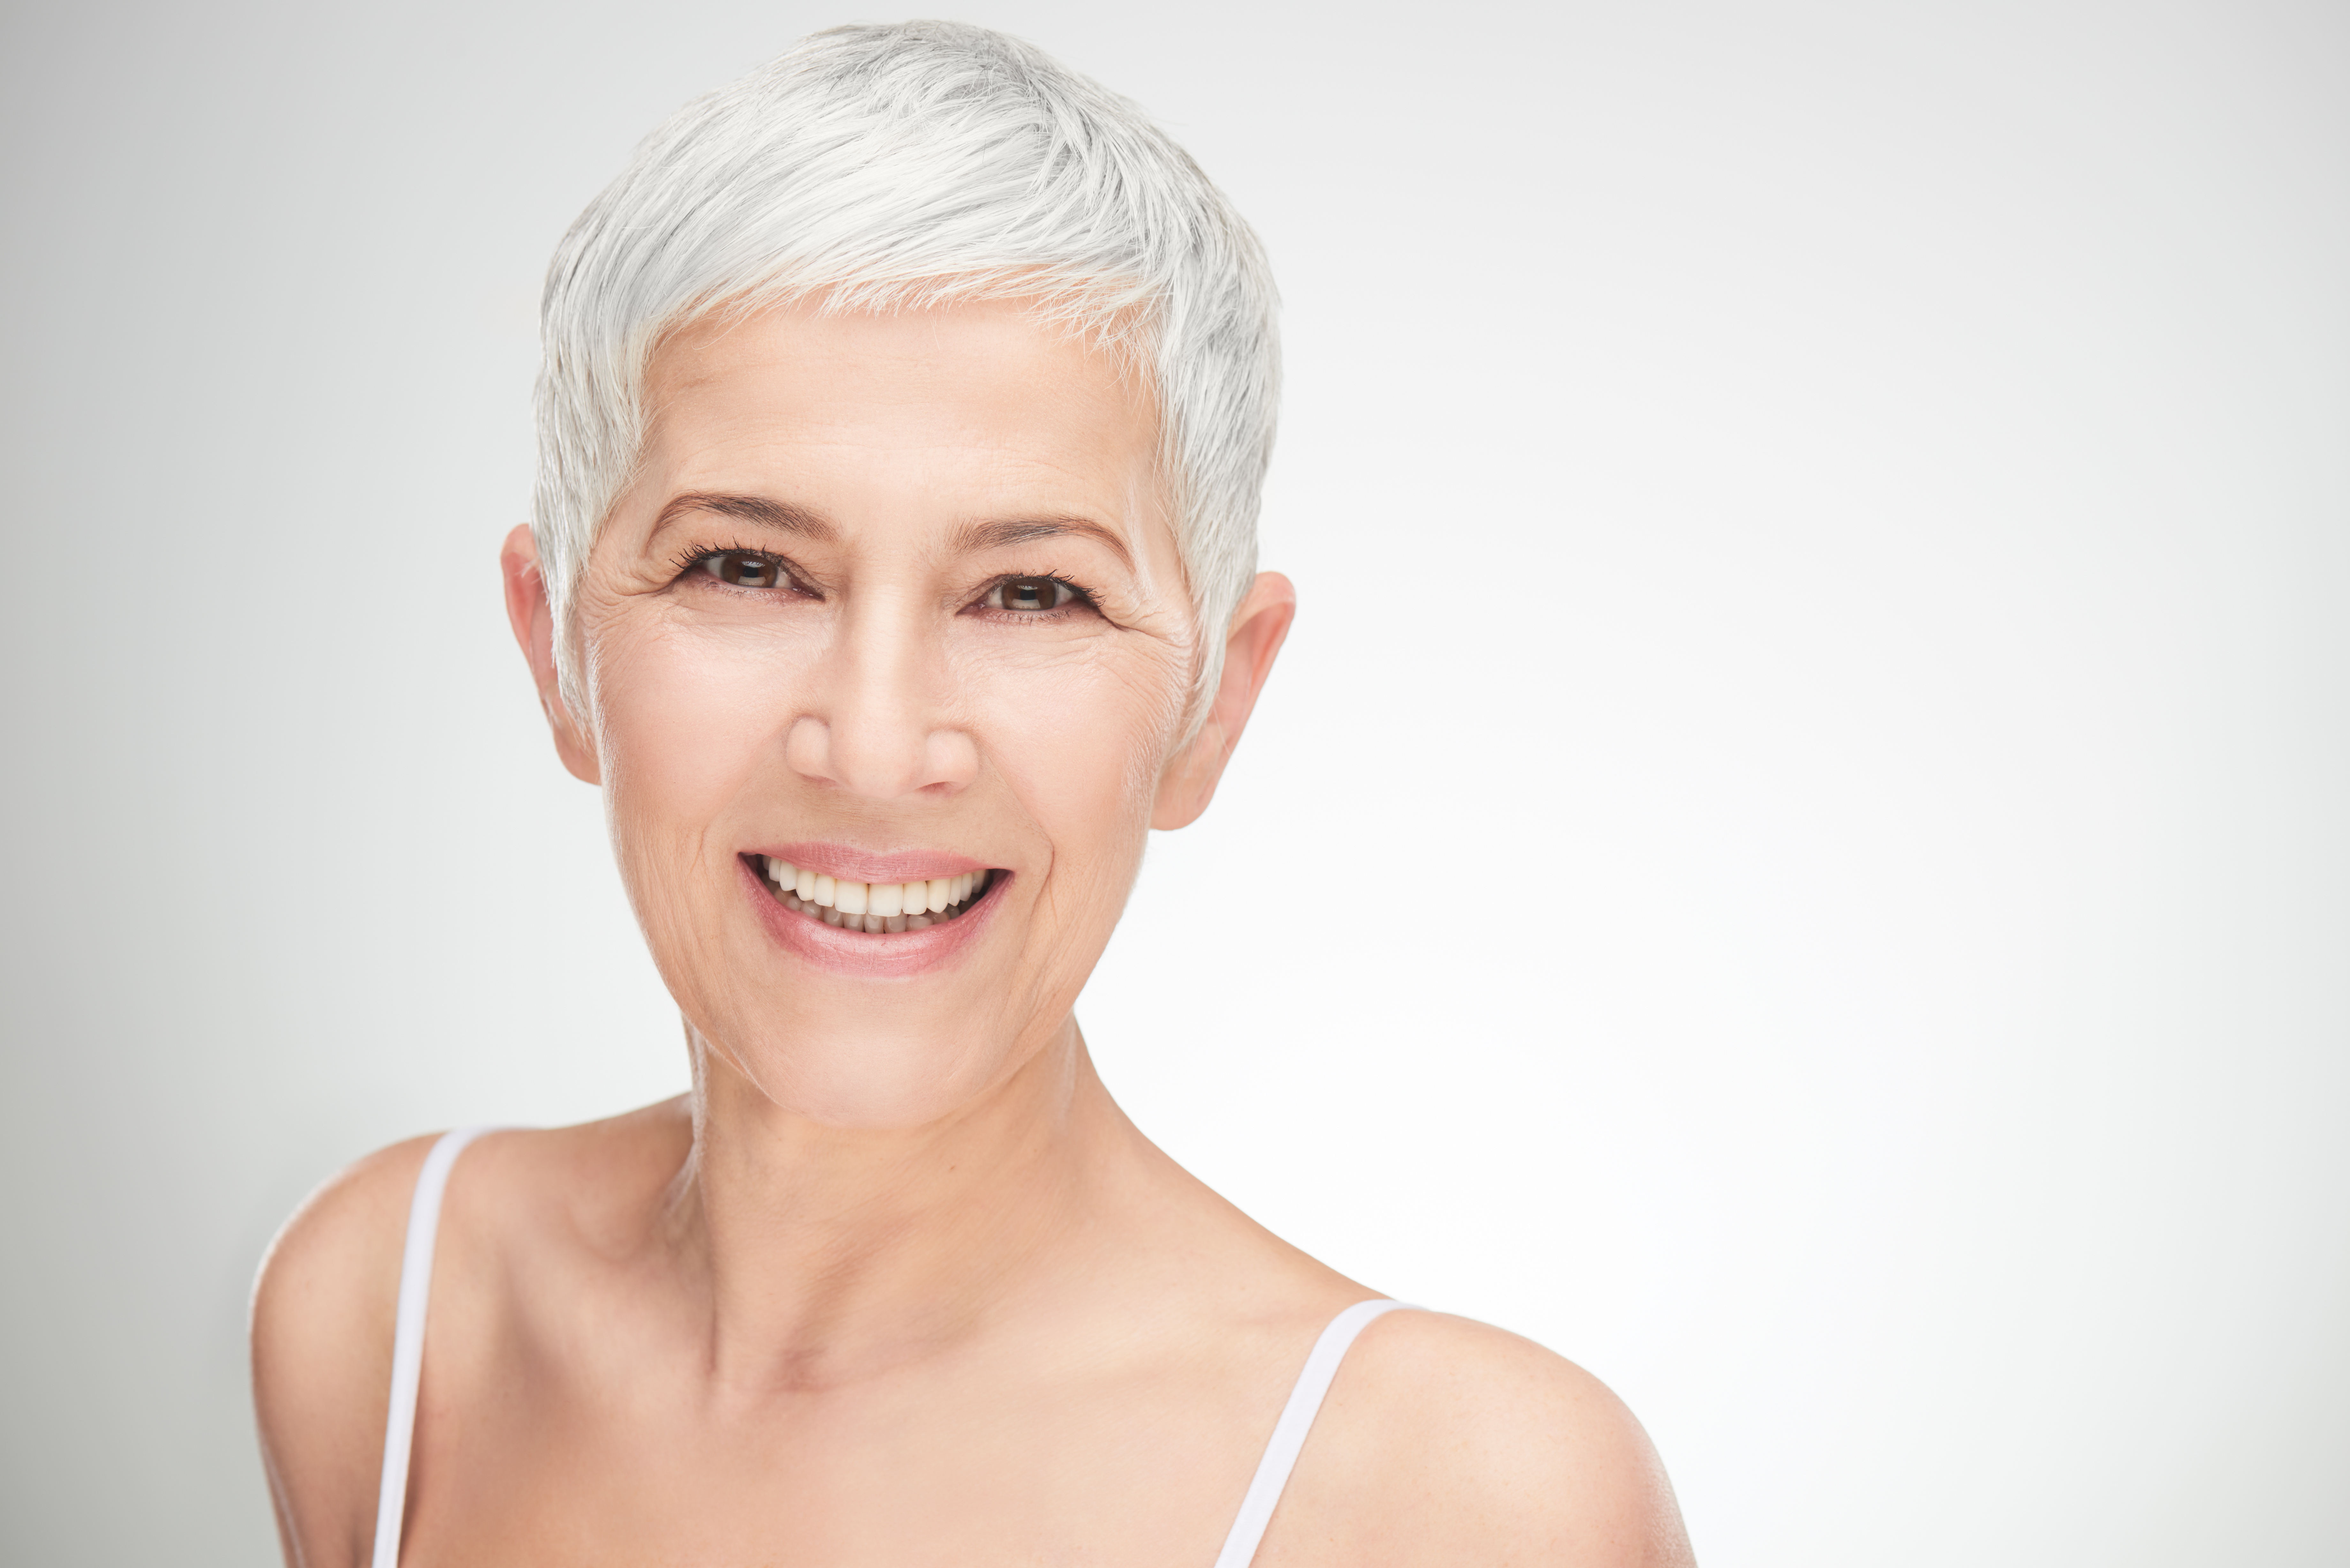 can you slow facial aging - andrew turchin dentist aspen co